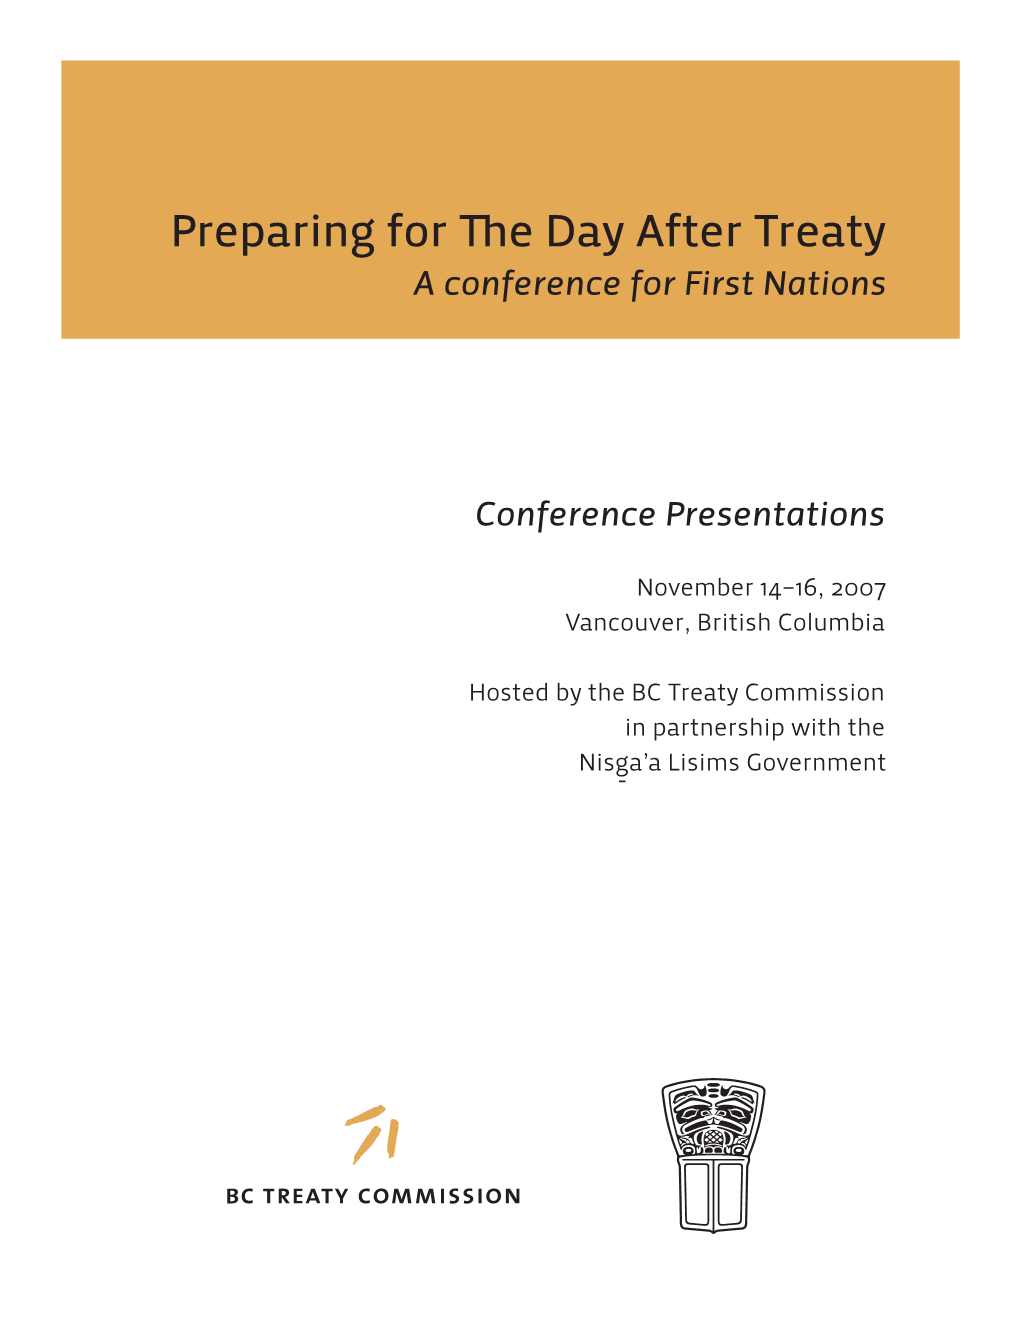 Preparing for the Day After Treaty: a Conference for First Nations